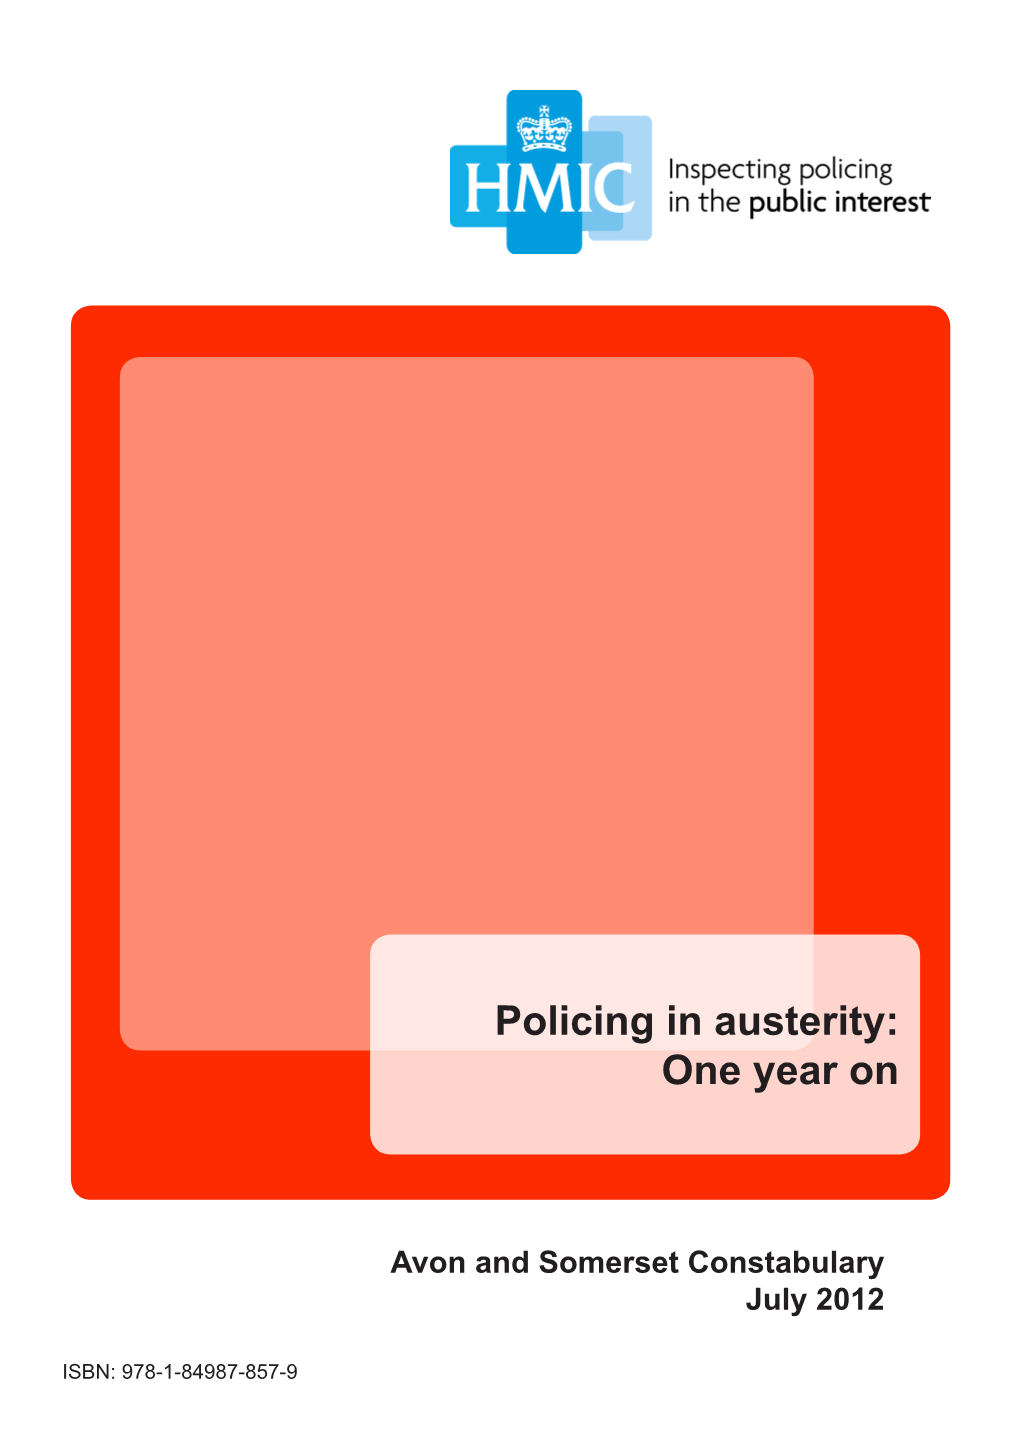 Avon and Somerset, Policing in Austerity: One Year On